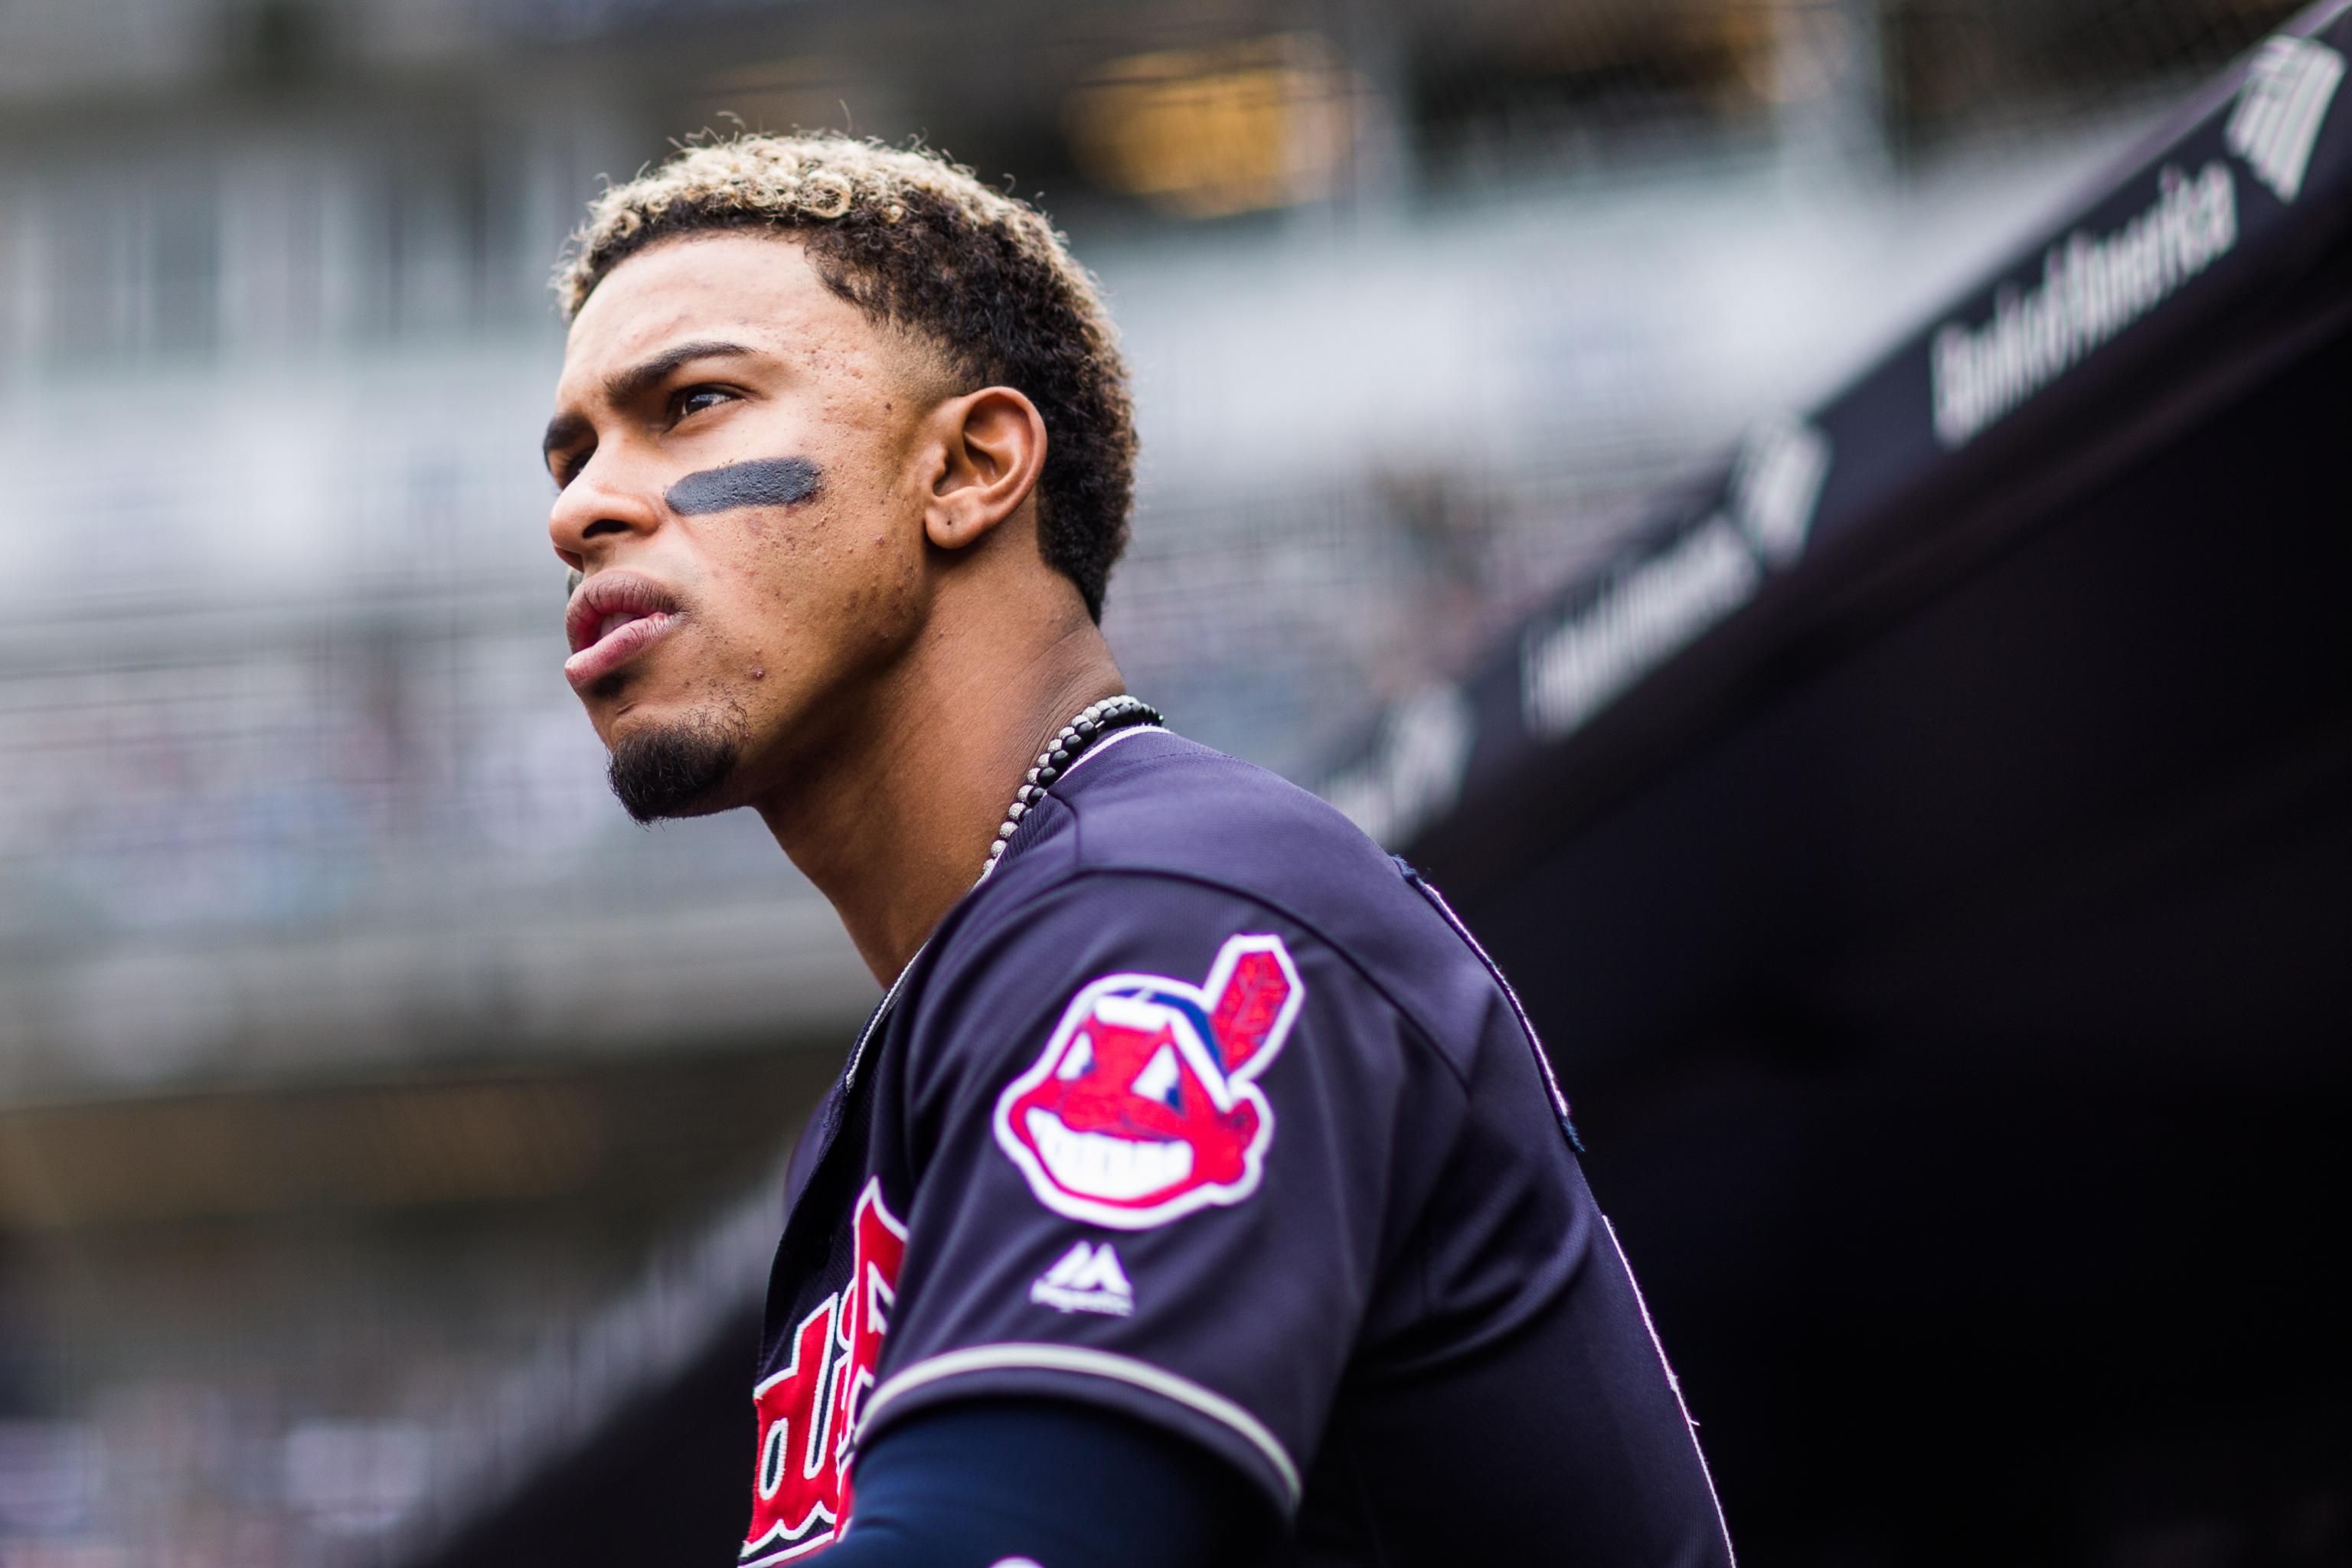 Cleveland Indians SS Francisco Lindor loses bet (and his hair